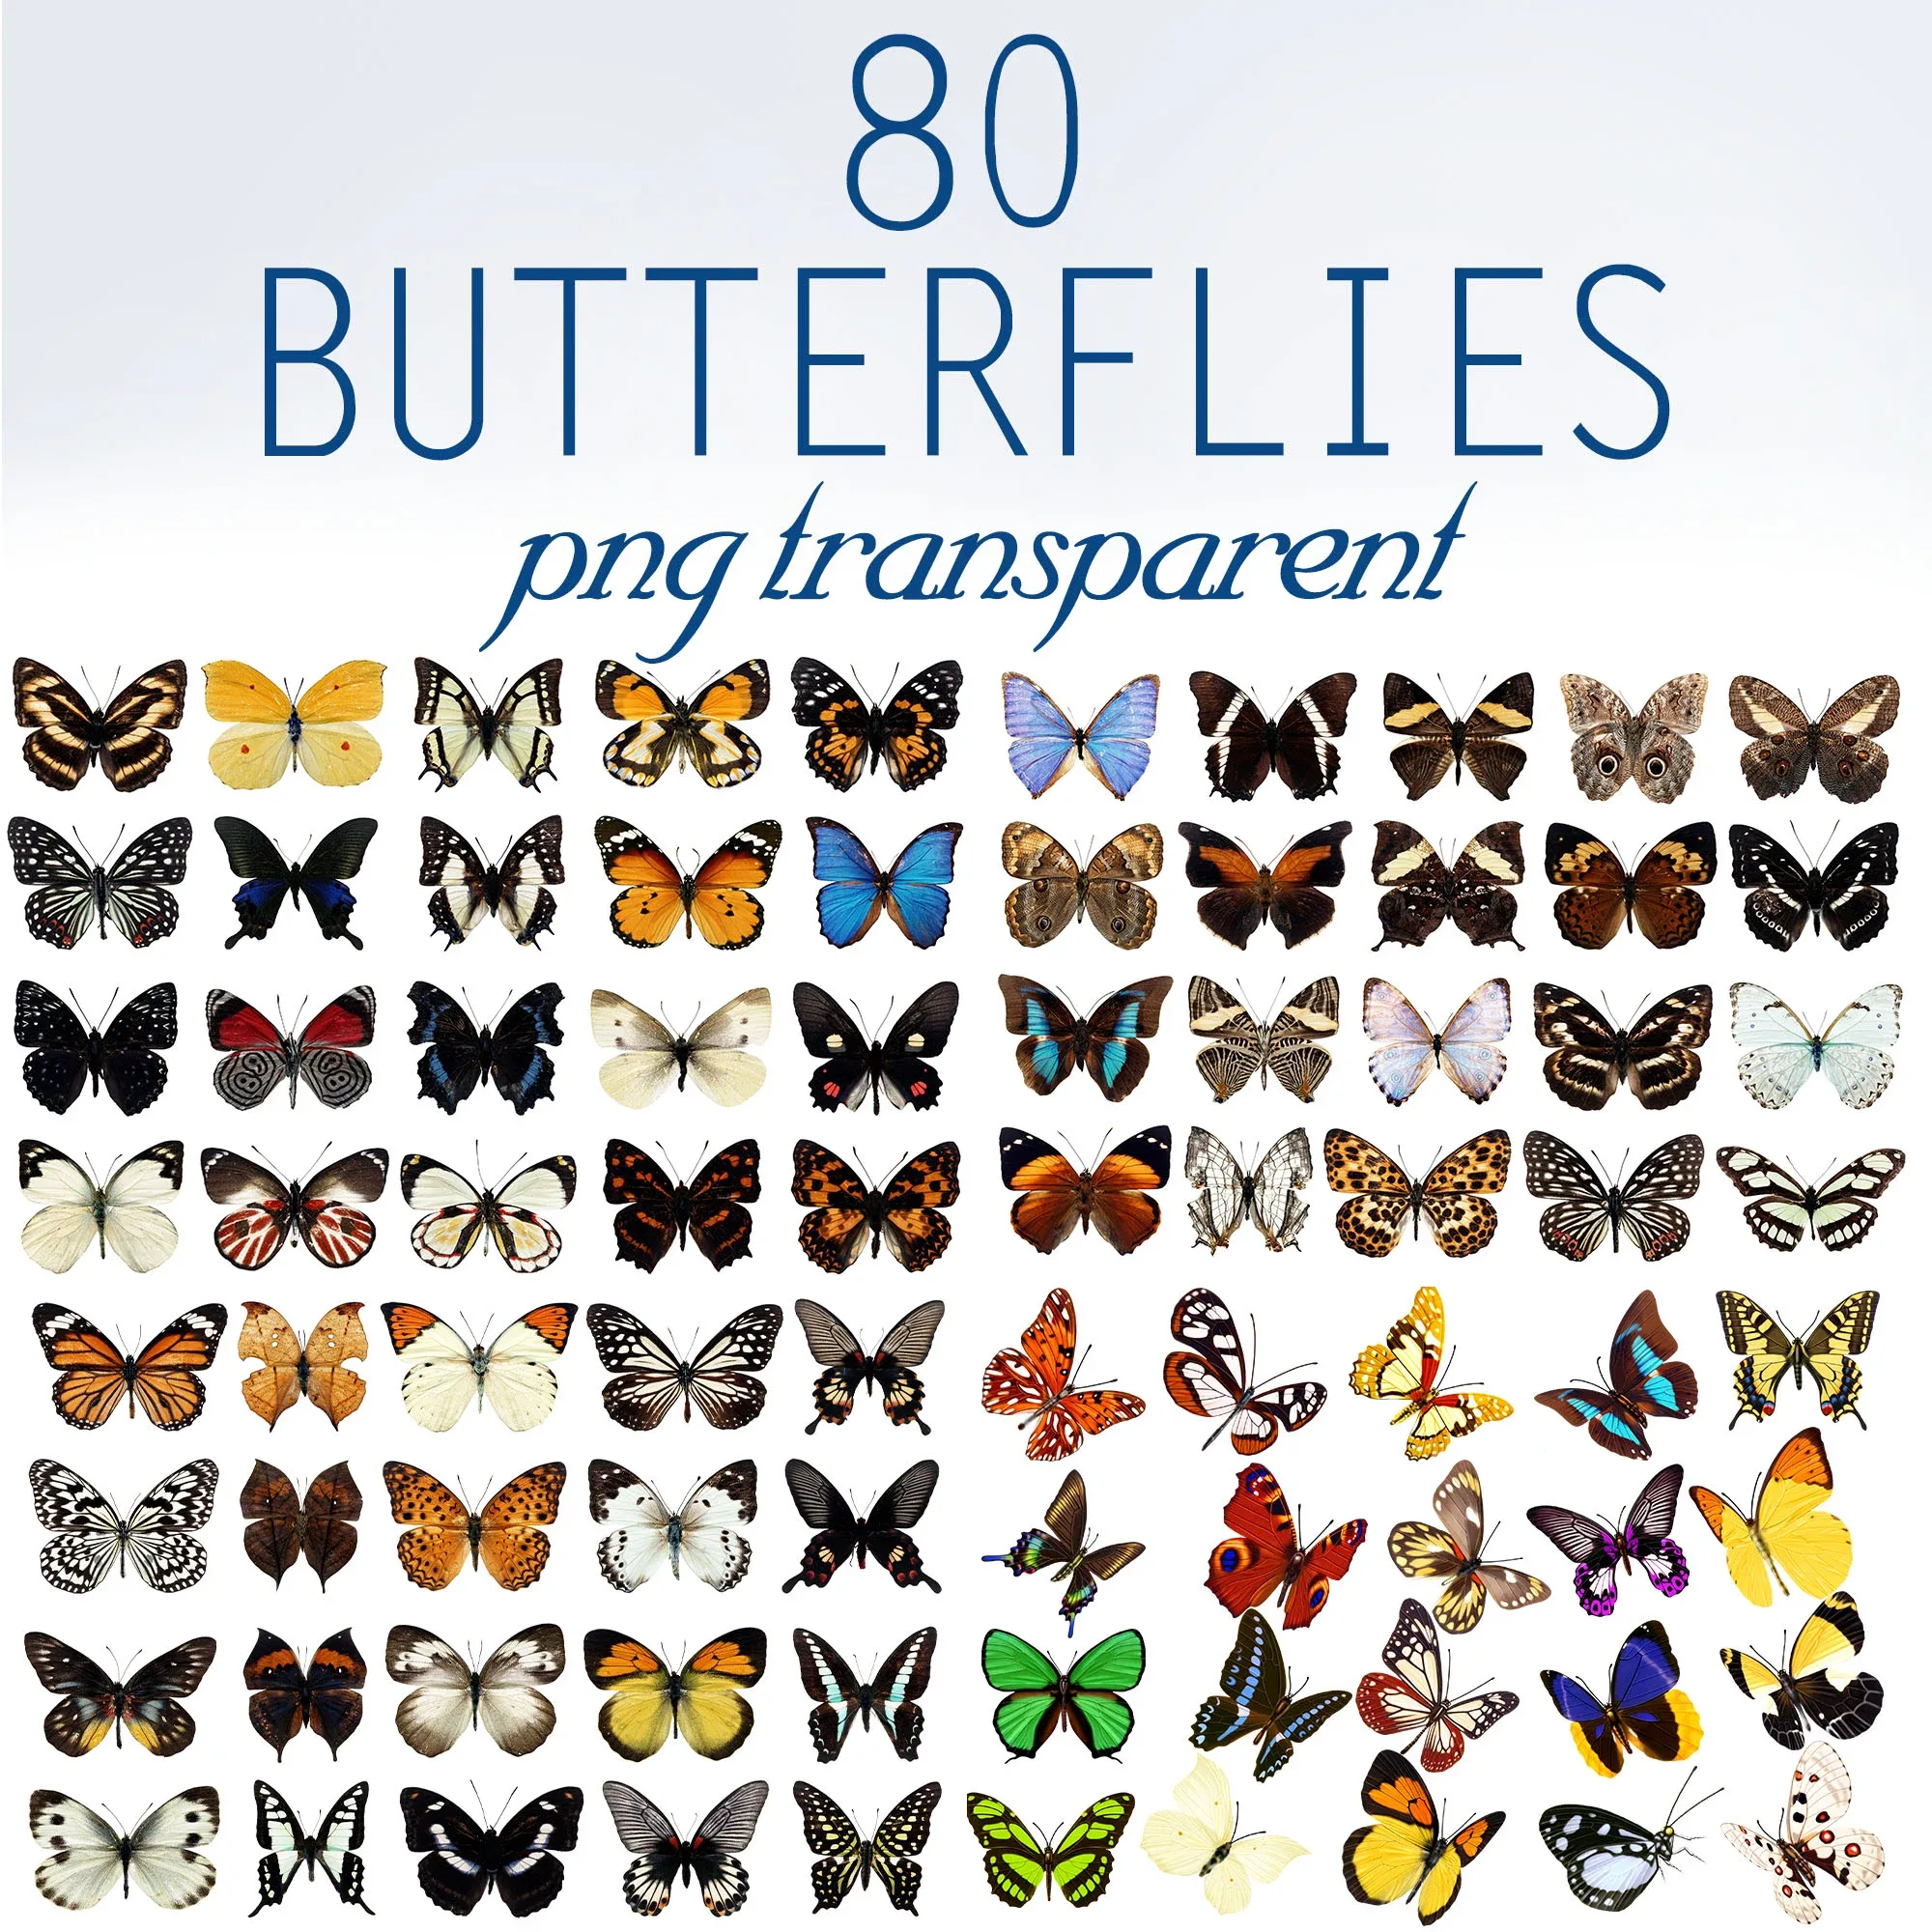 80 Butterflies, Butterfly Clip Art, Butterfly Photo Overlays, Photoshop Butterfly Overlay, Realistic Butterflies PNG Files, Insects